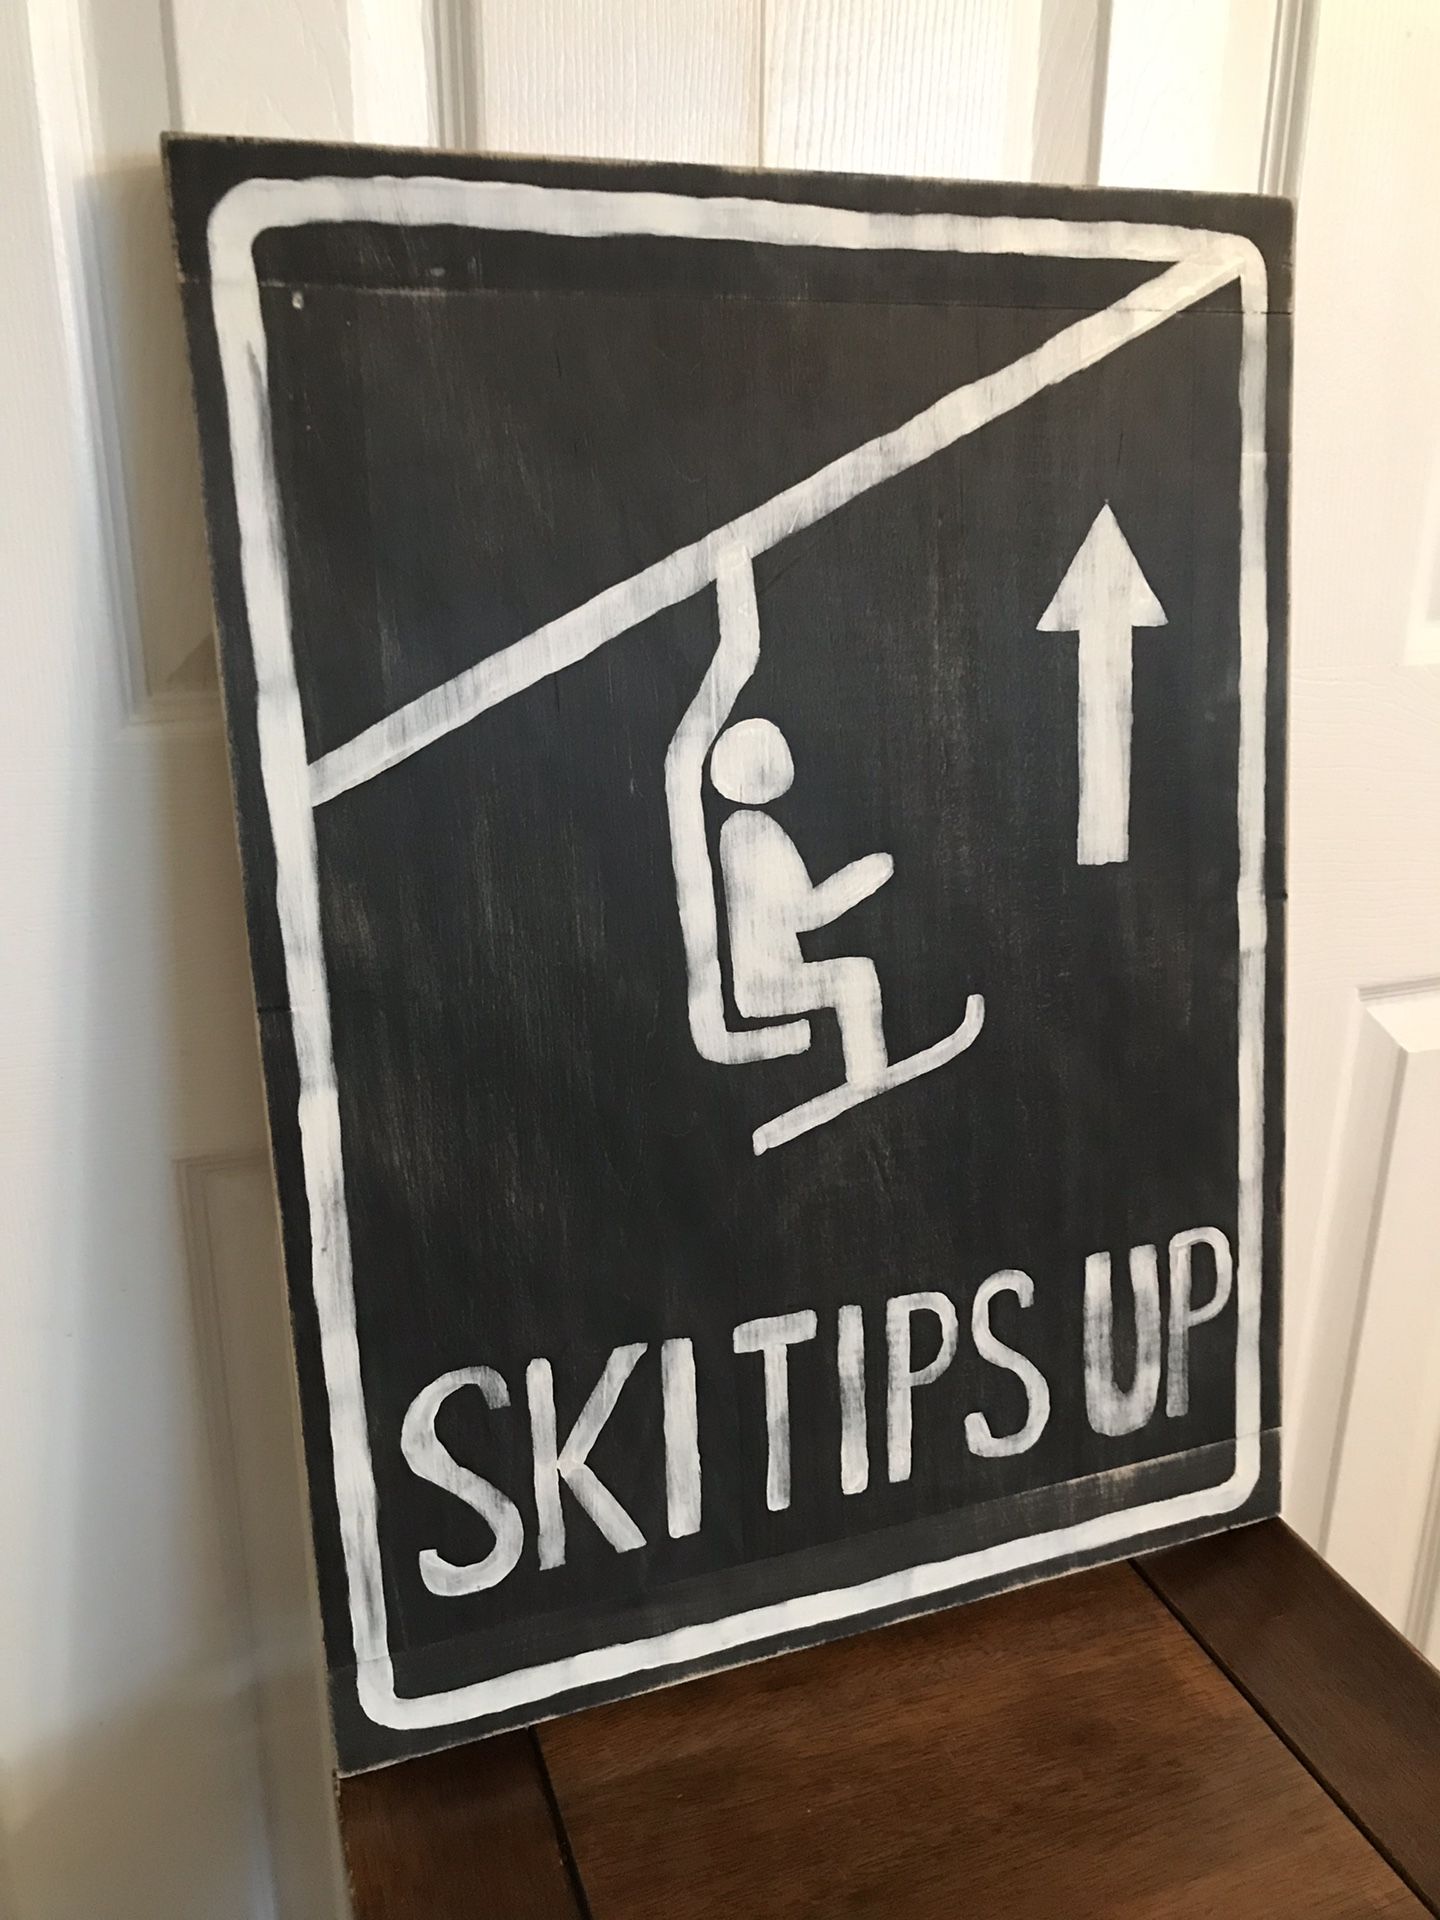 Hand Painted Ski Tips Up Wall Hanger